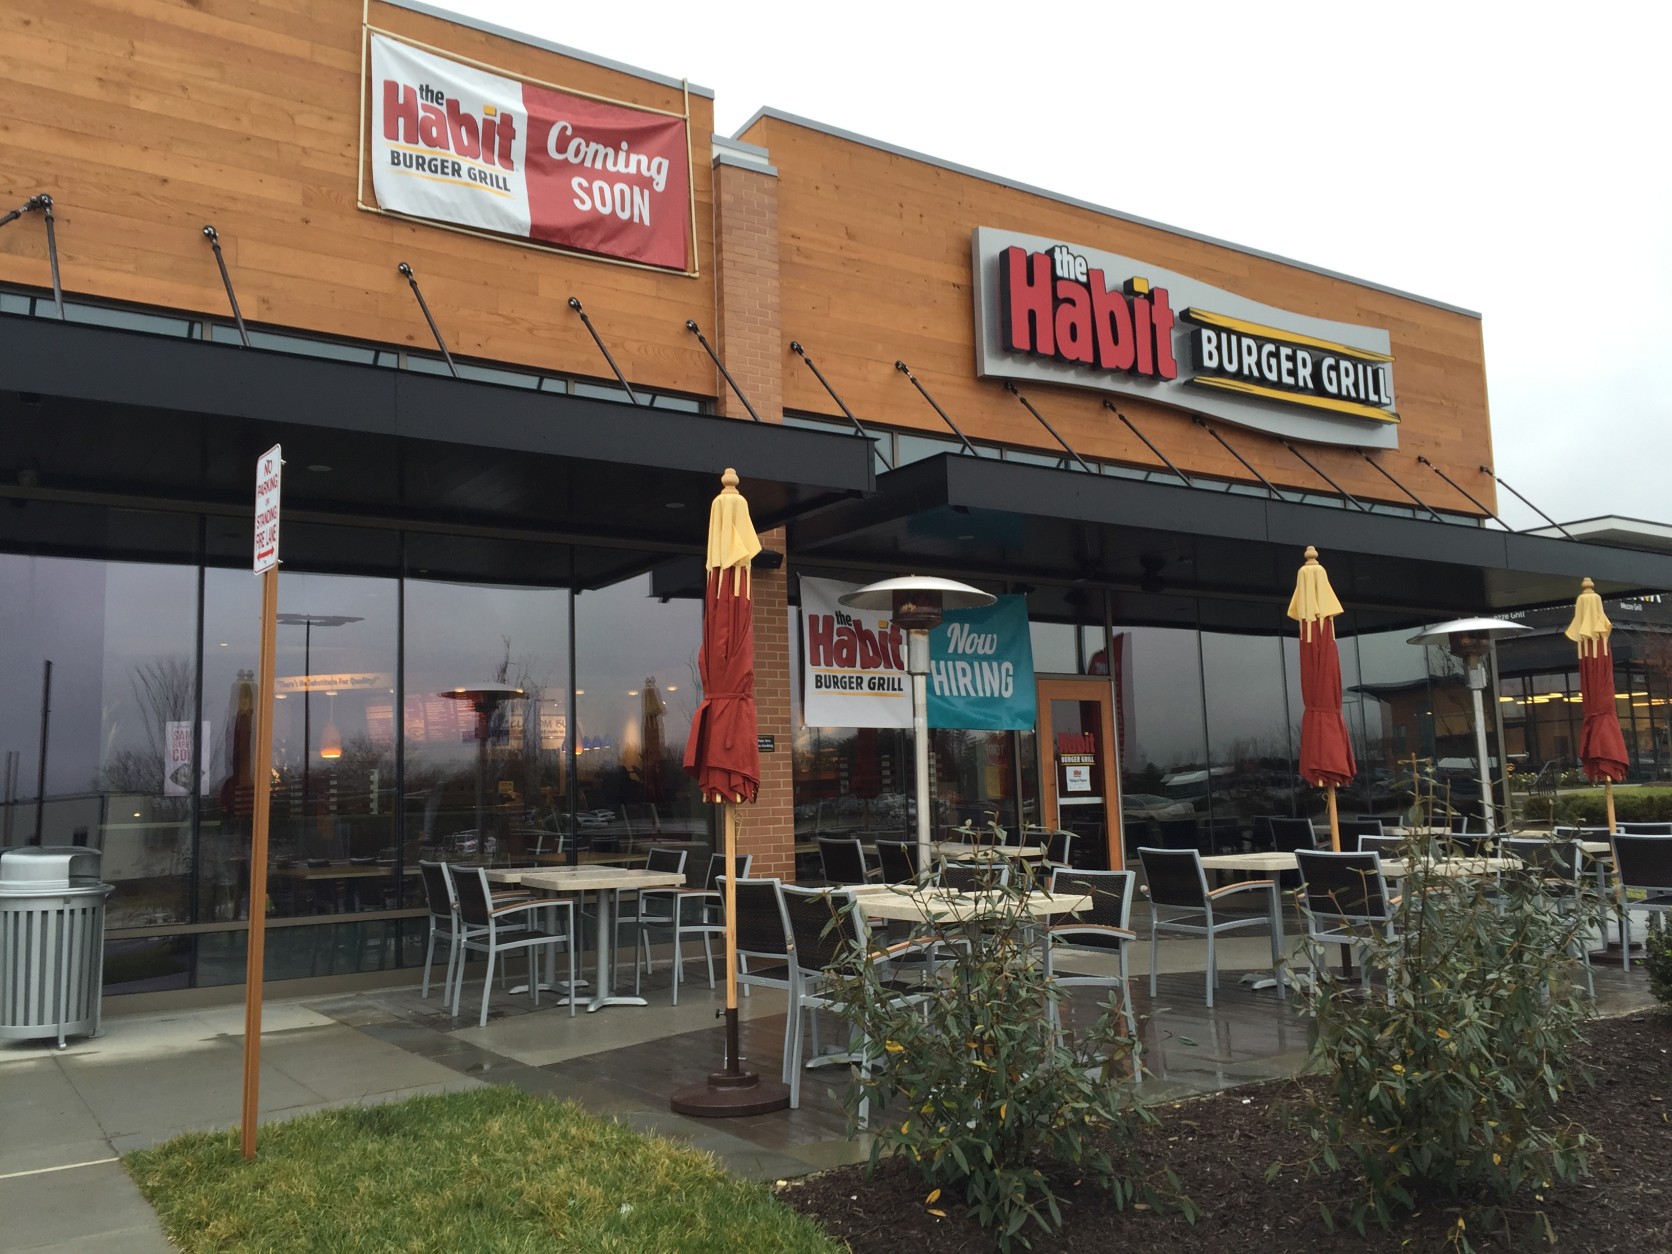 The Habit Burger Grill officially opens in Ashburn on Saturday, but it's holding several open-to-the-public preview events before then. (WTOP/Michelle Basch)